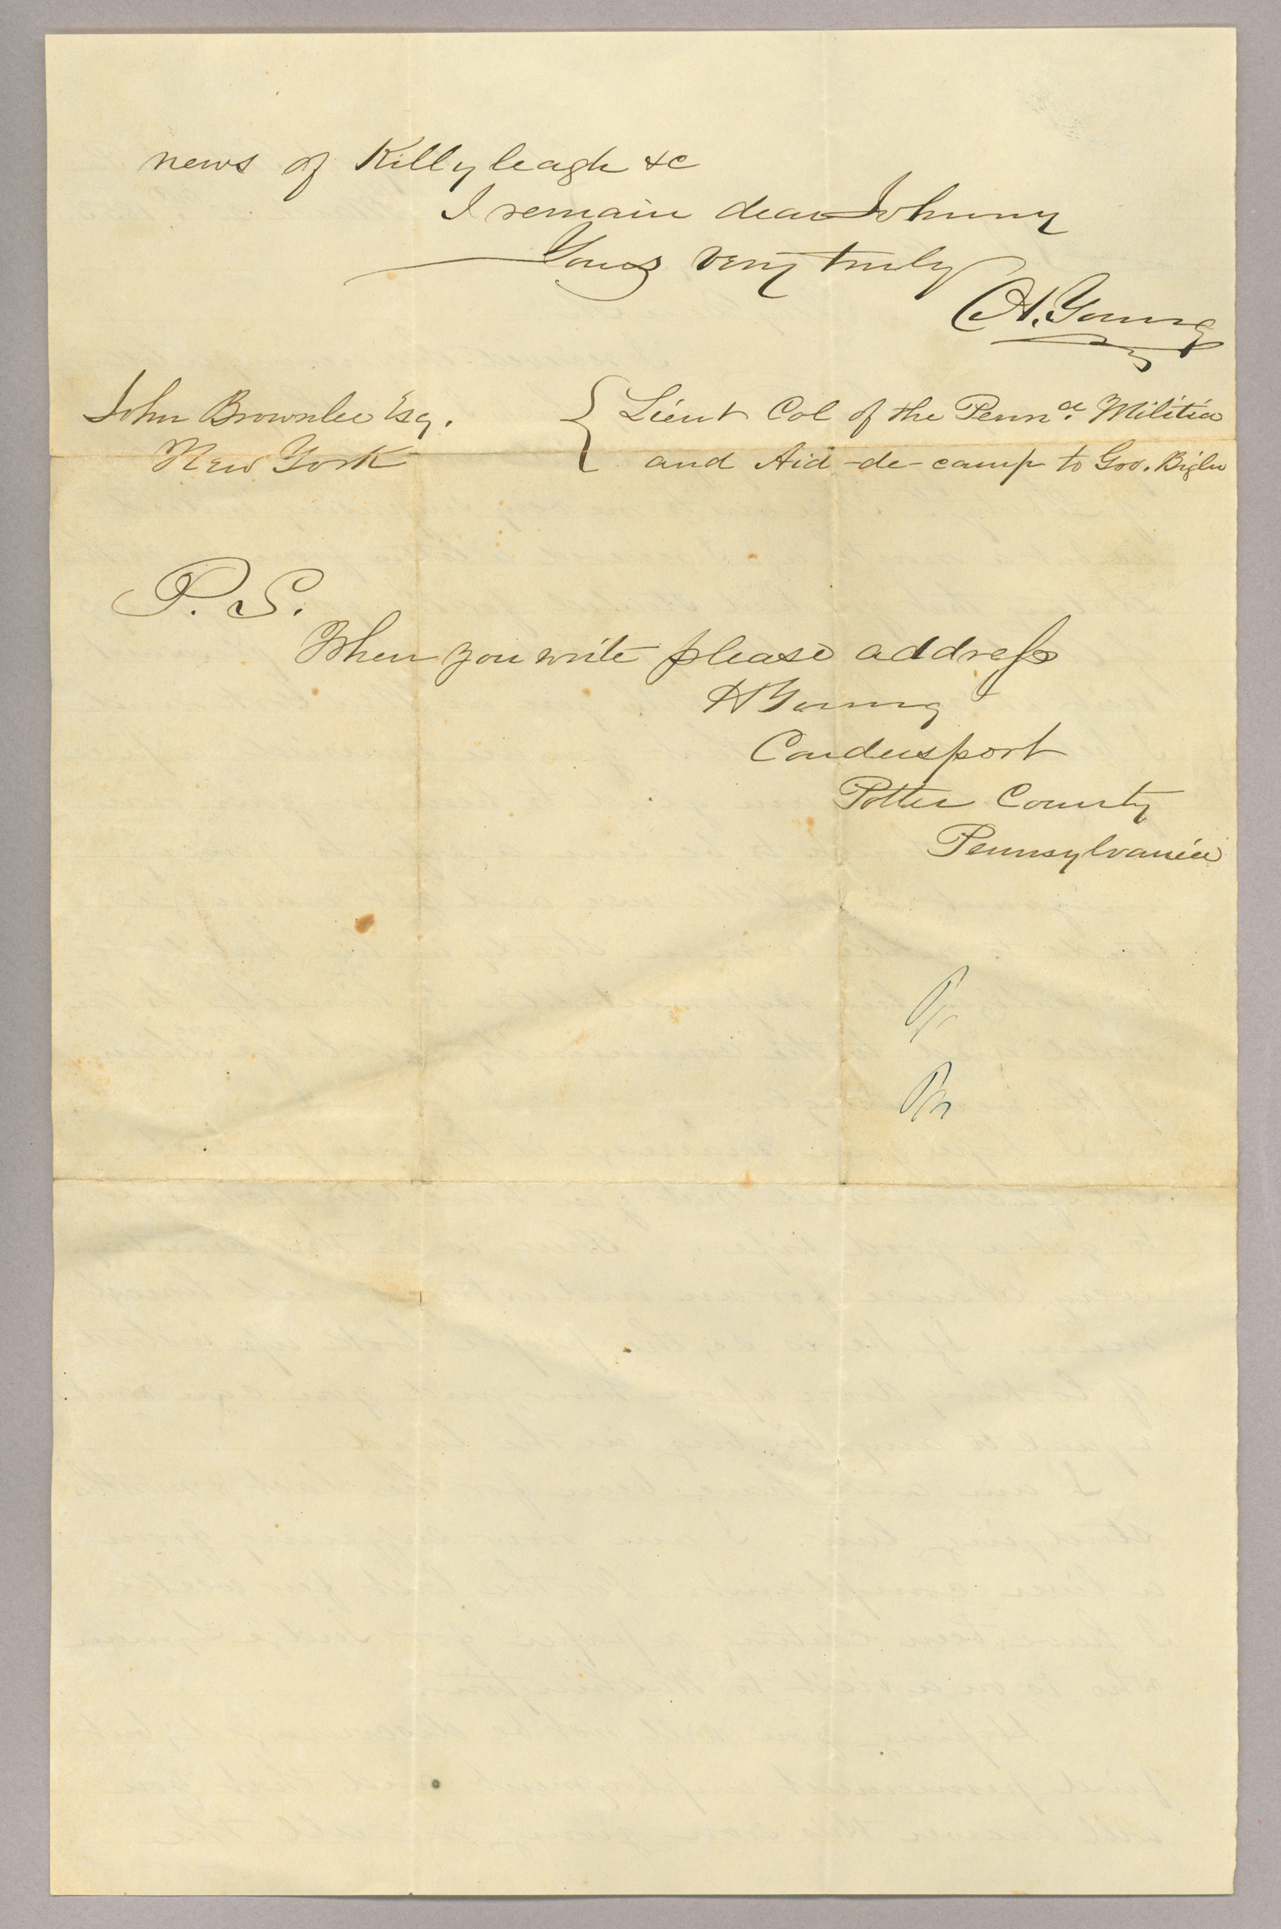 Letter. H[ugh] Young, Coudersport, Pennsylvania, to John [E.] Brownlee Esq., New York, New York, Page 2